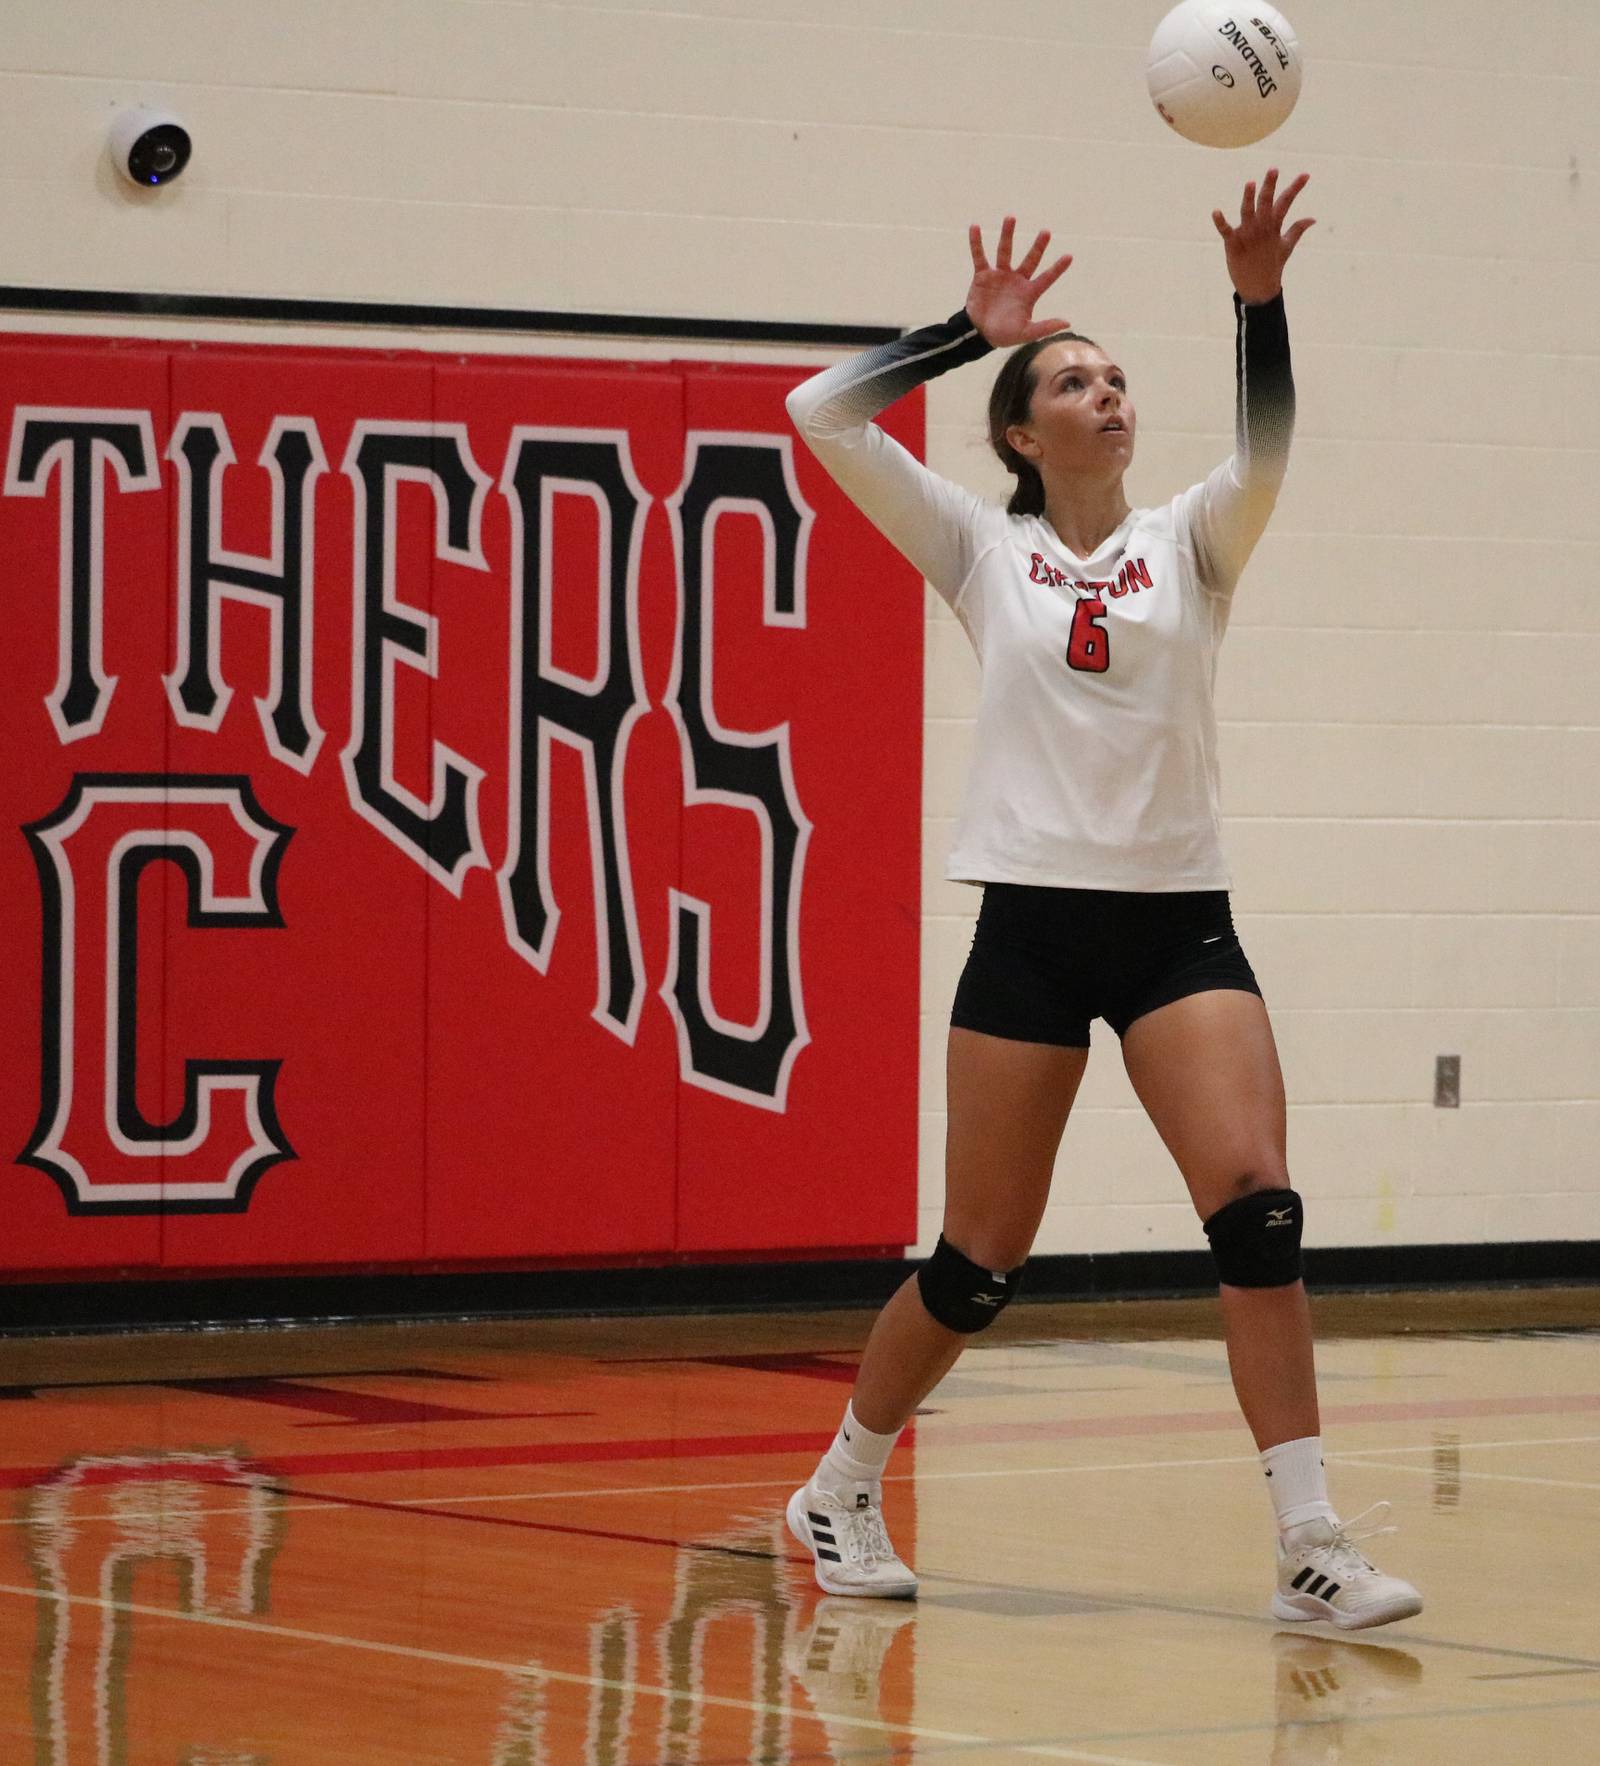 Paup named to AllConference Volleyball Creston News